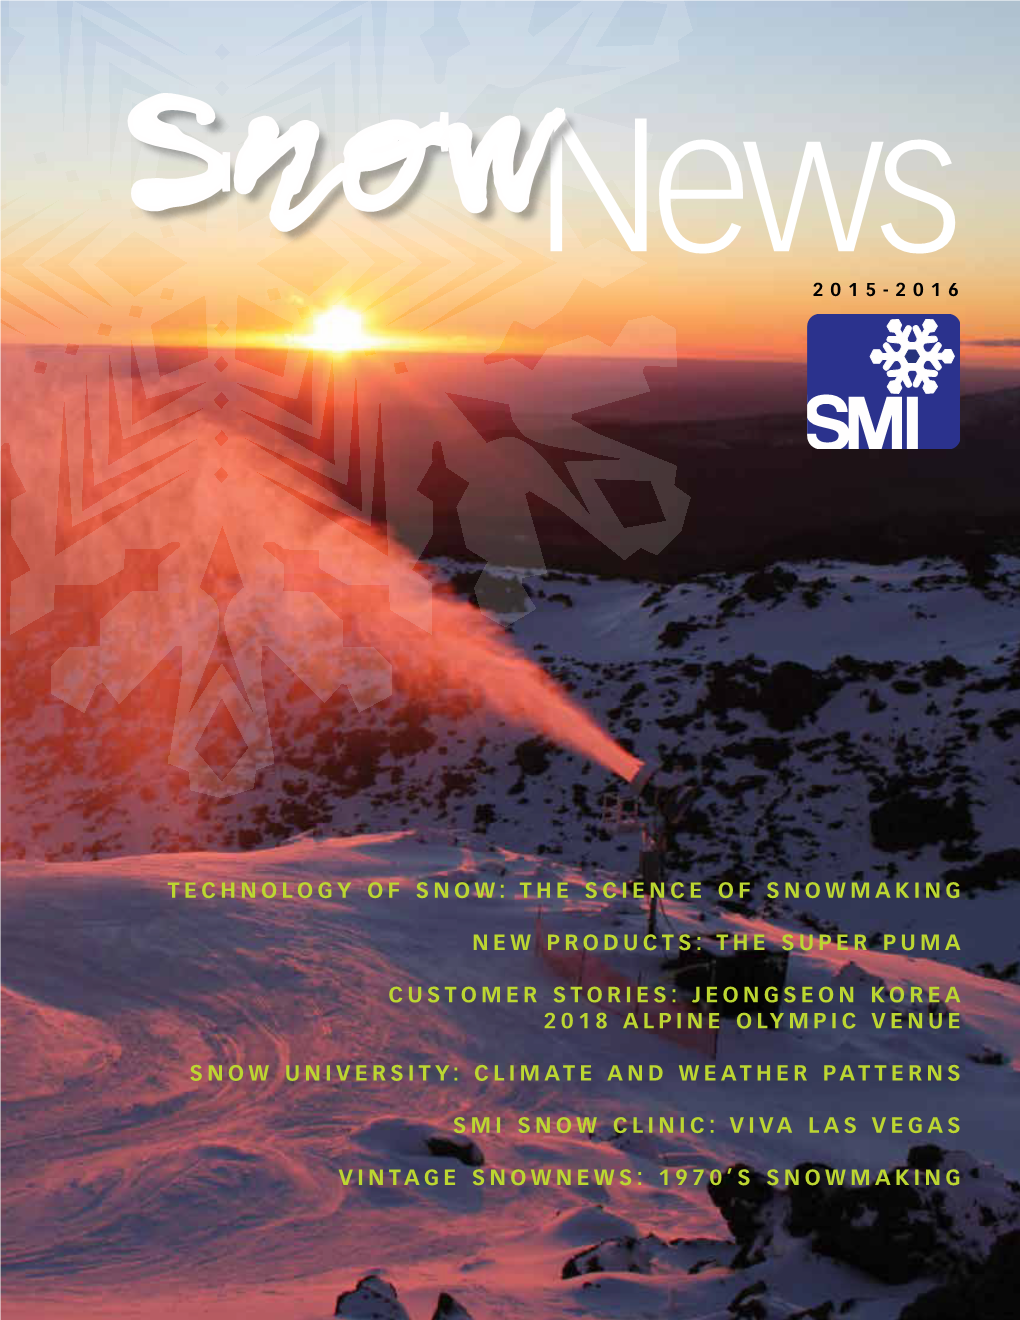 THE SCIENCE of Snowmaking NEW Products